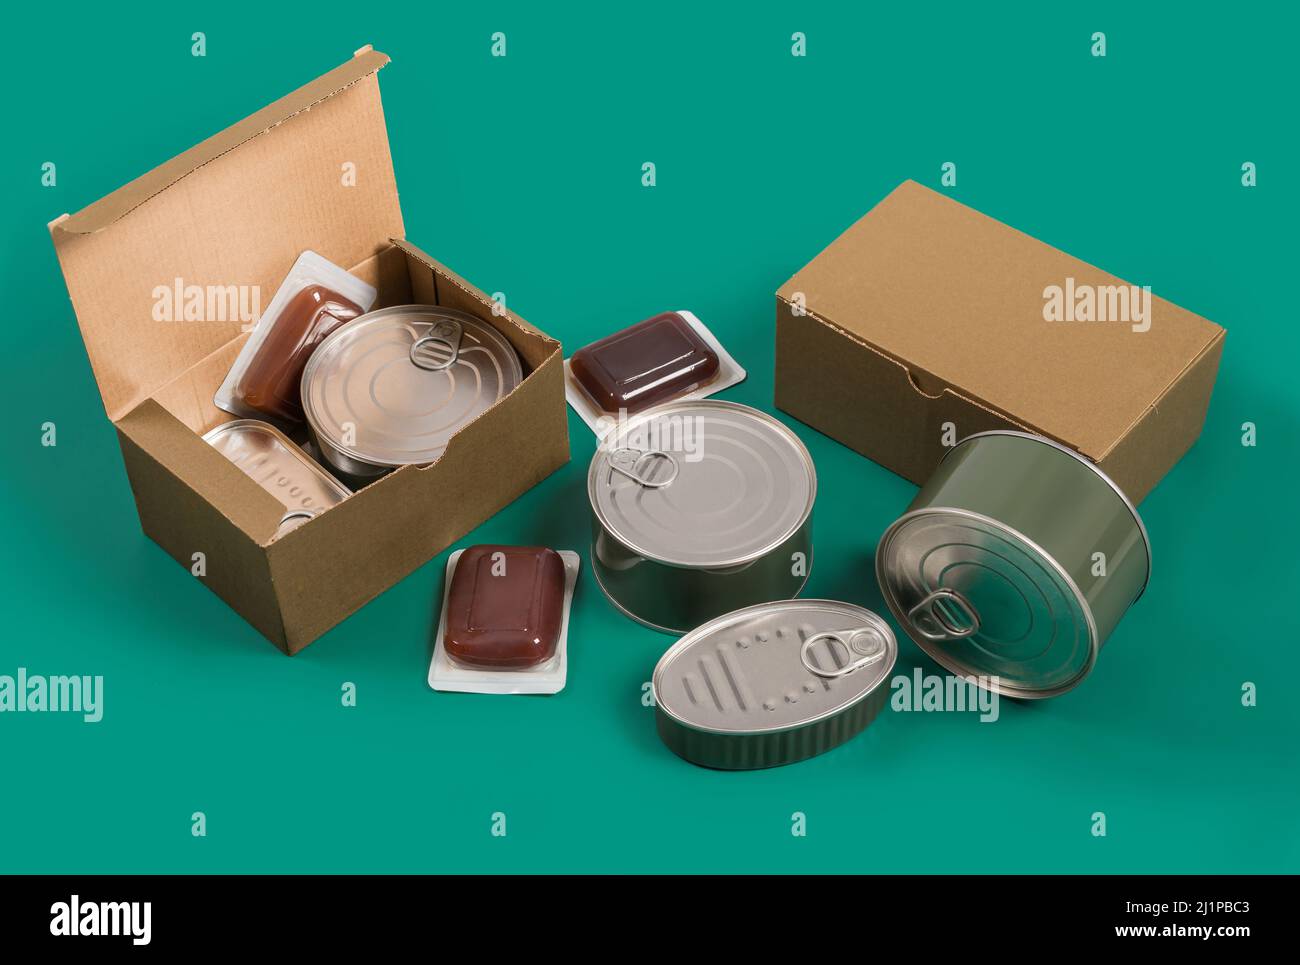 Canned food set, terrines cardboard boxes on green background. Stock Photo